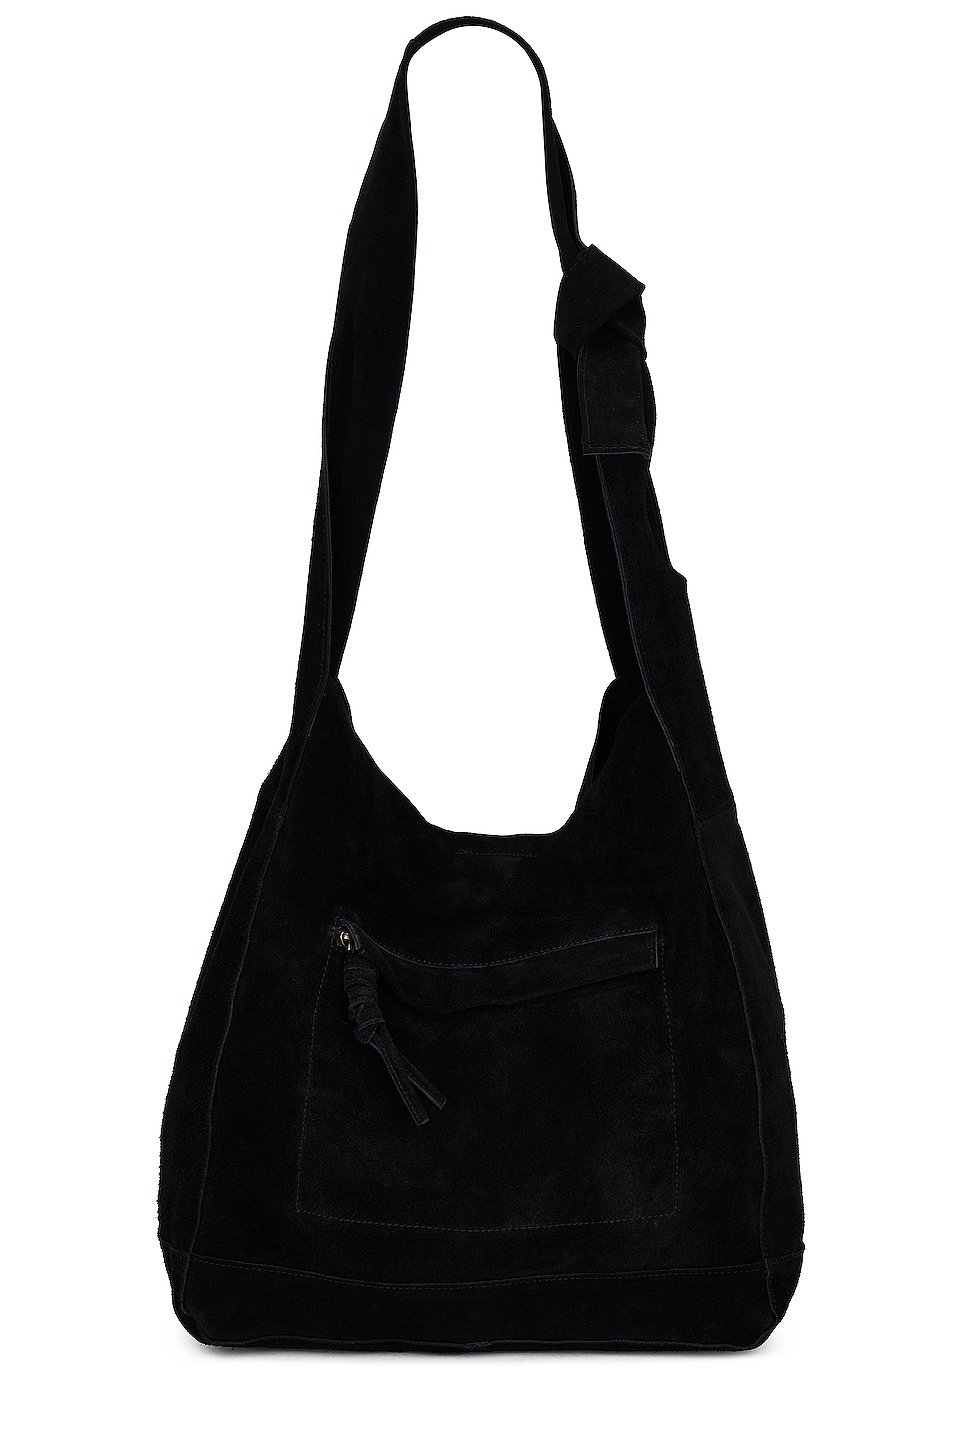 Free People Jessa Suede Carryall in Black | REVOLVE